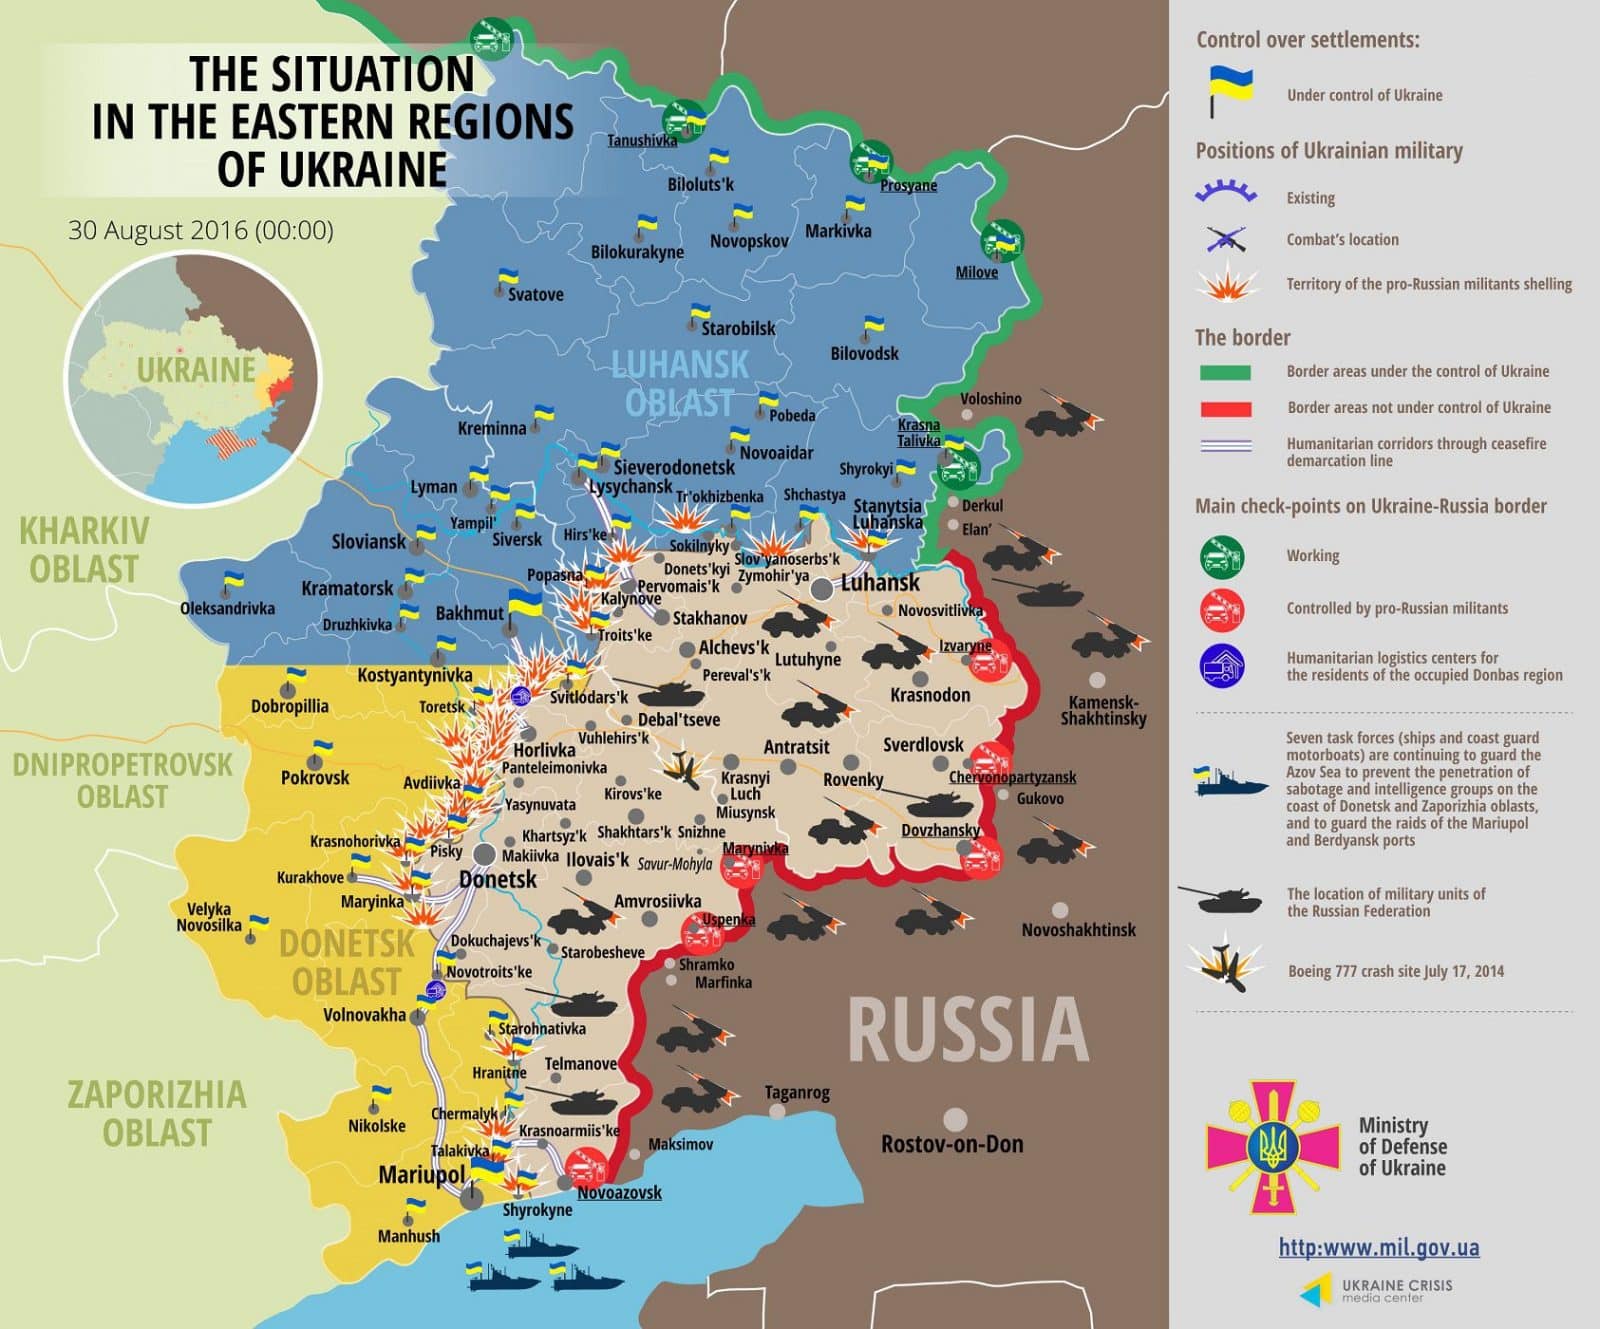 Russian troops attack Ukraine 91 times in past 24 hours amid escalation